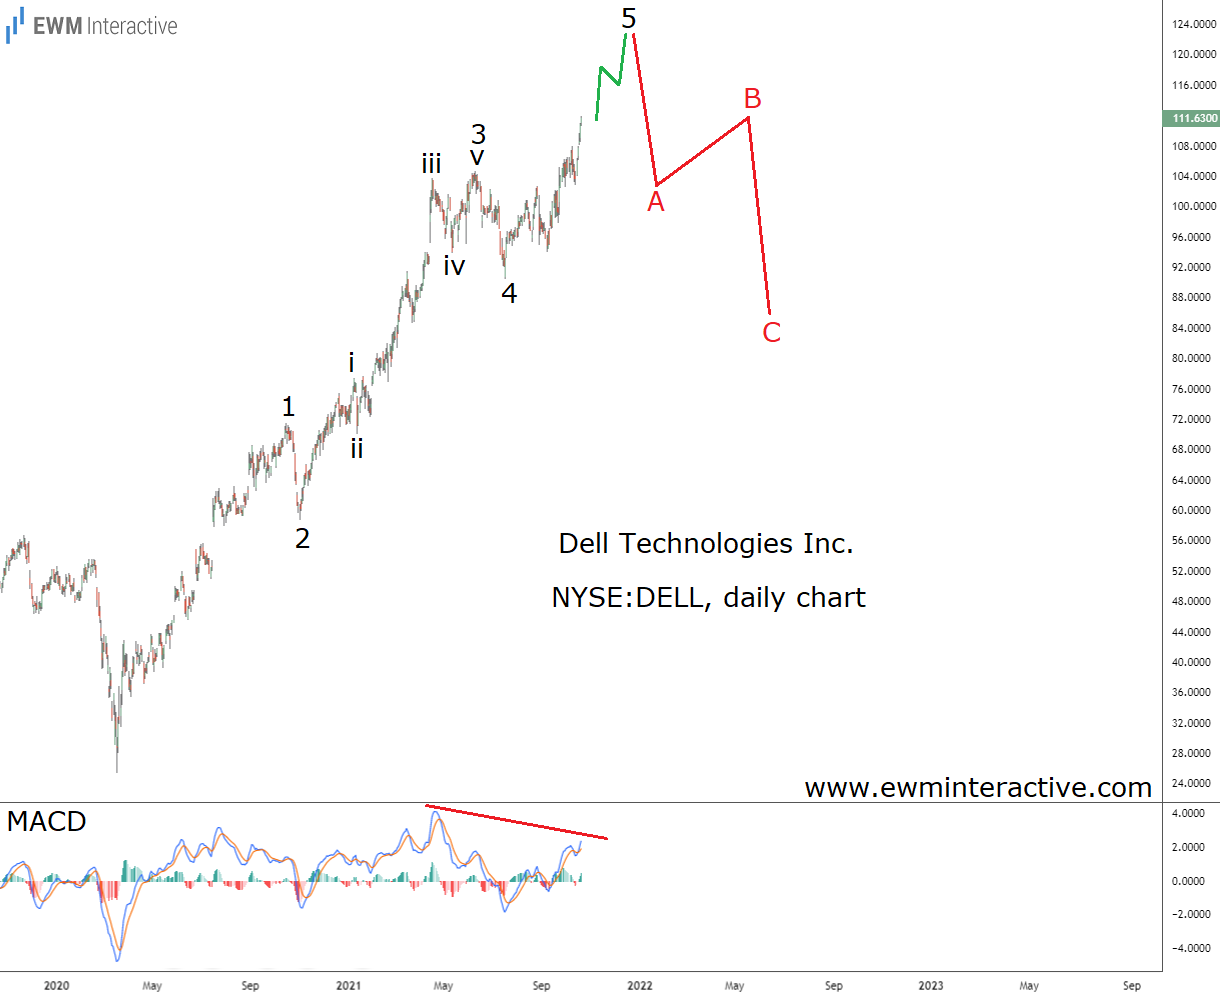 VMware Spinoff Didn't Change Dell's Wave Pattern 